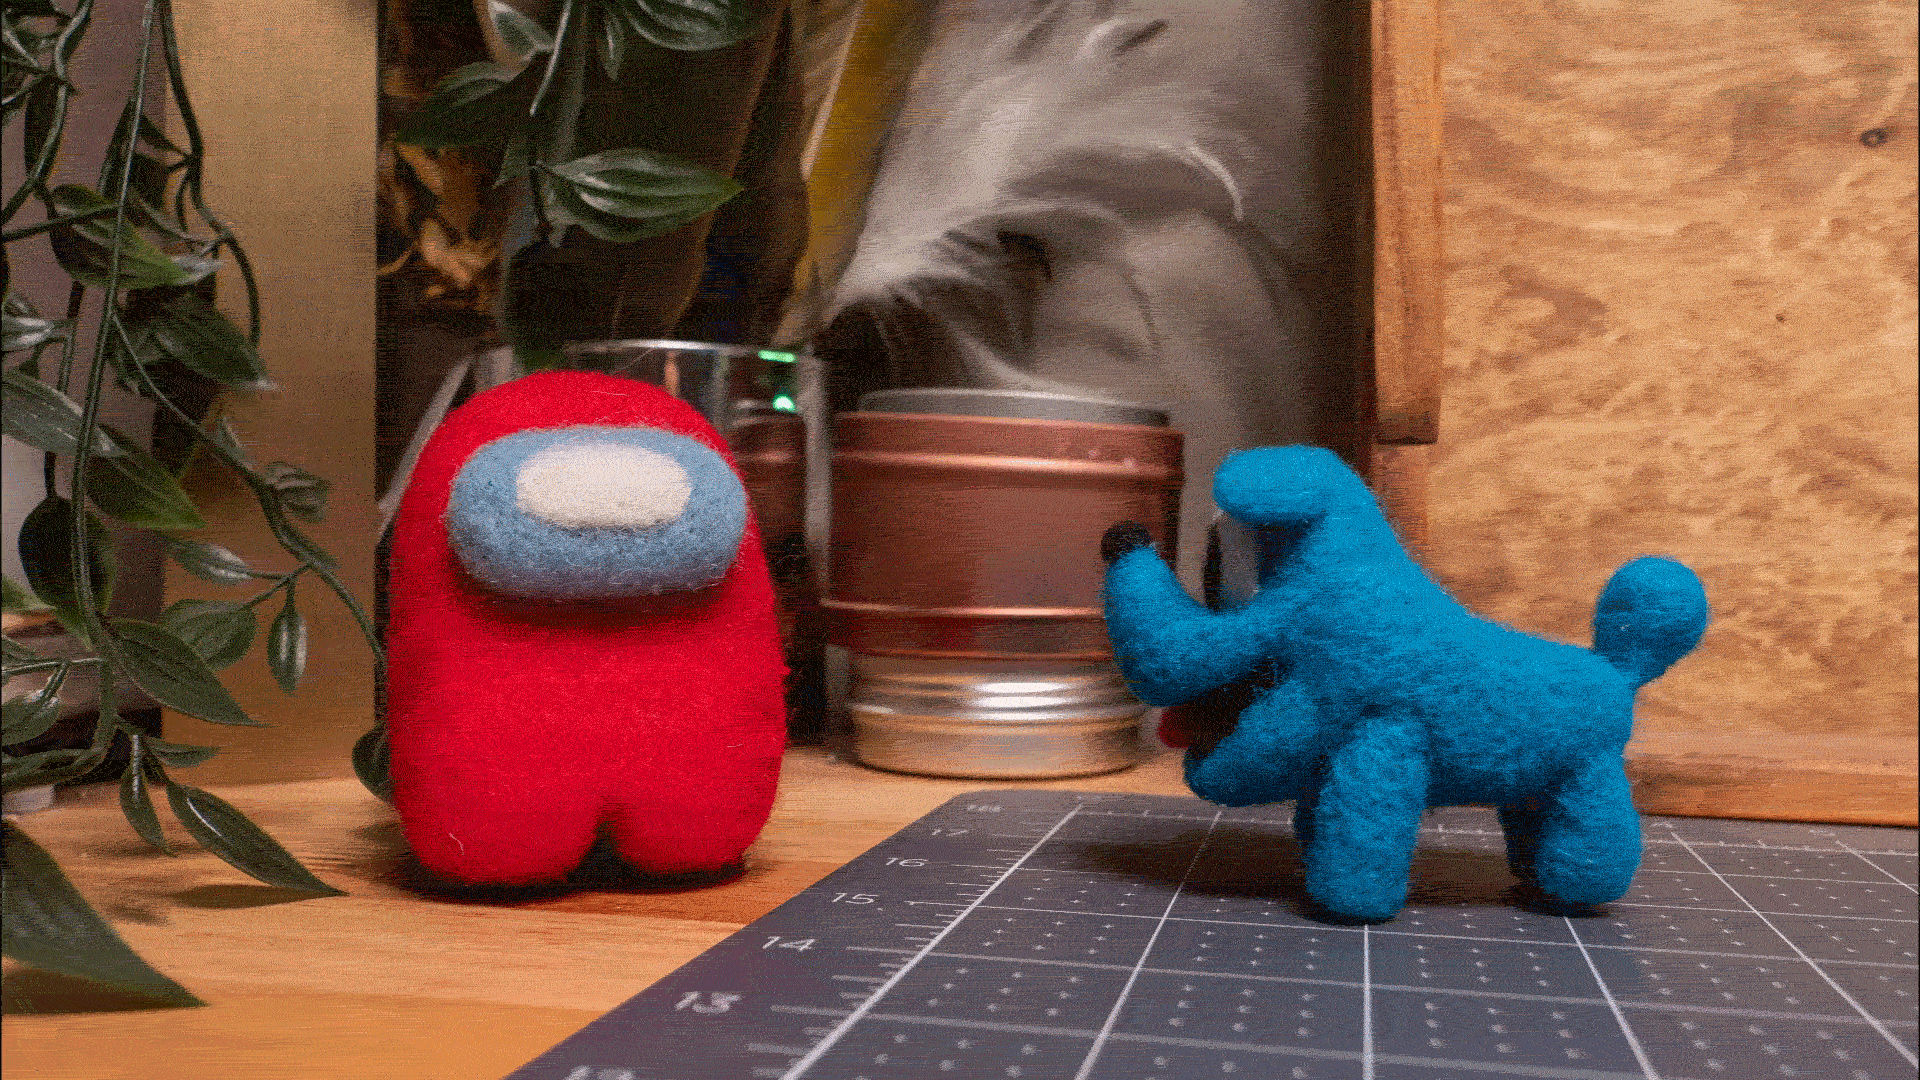 An animated gif of the Amarte Studio Needle Felted Crewmate riding away on the felted blue space dog.